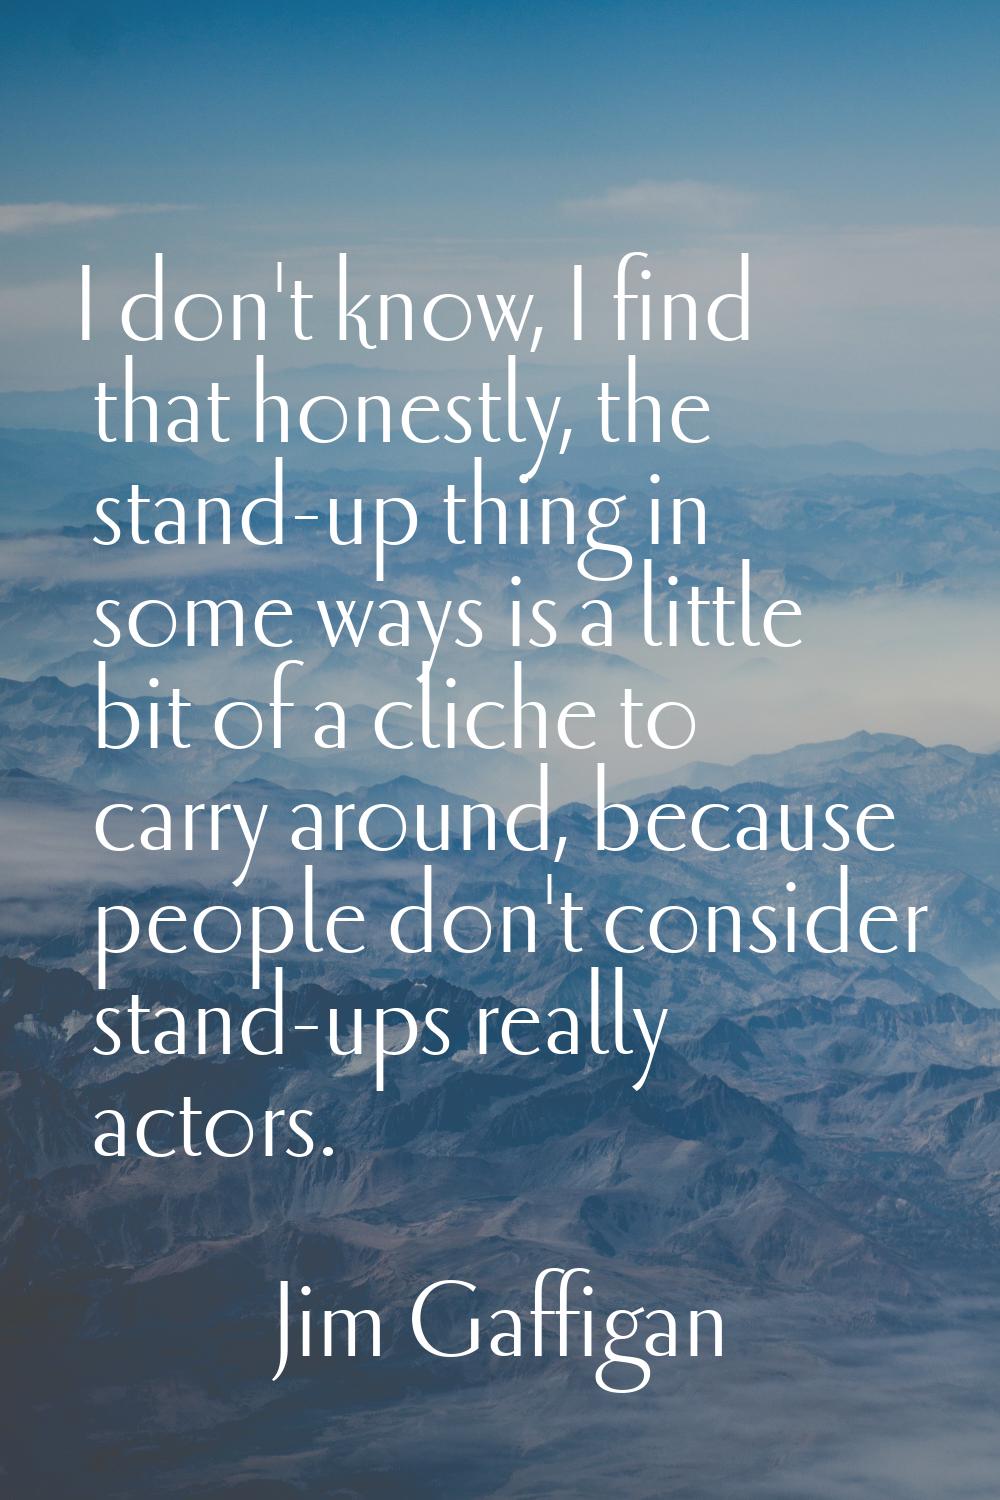 I don't know, I find that honestly, the stand-up thing in some ways is a little bit of a cliche to 